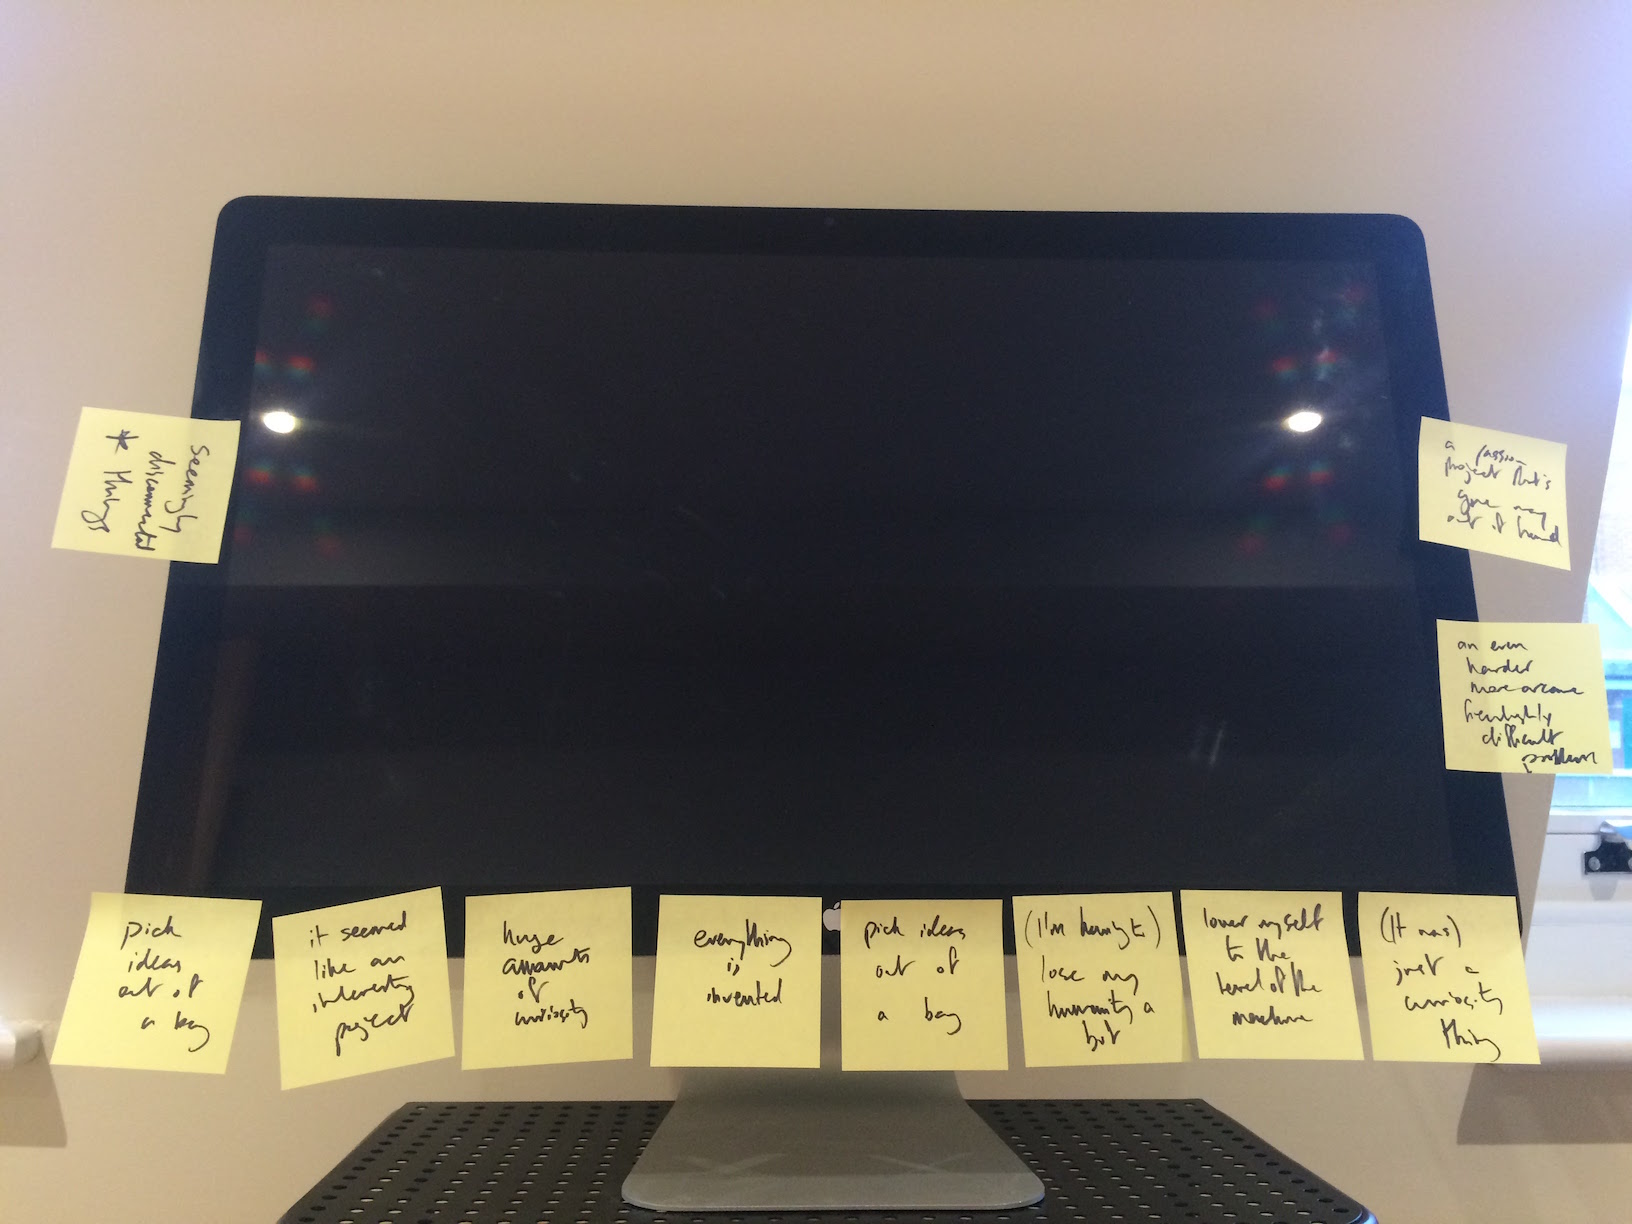 A monitor with many Post-it notes attached: “seemingly disconnected things”, “pick ideas out of a bag”, “it seemed like an interesting project”, “huge amounts of curiosity” etc